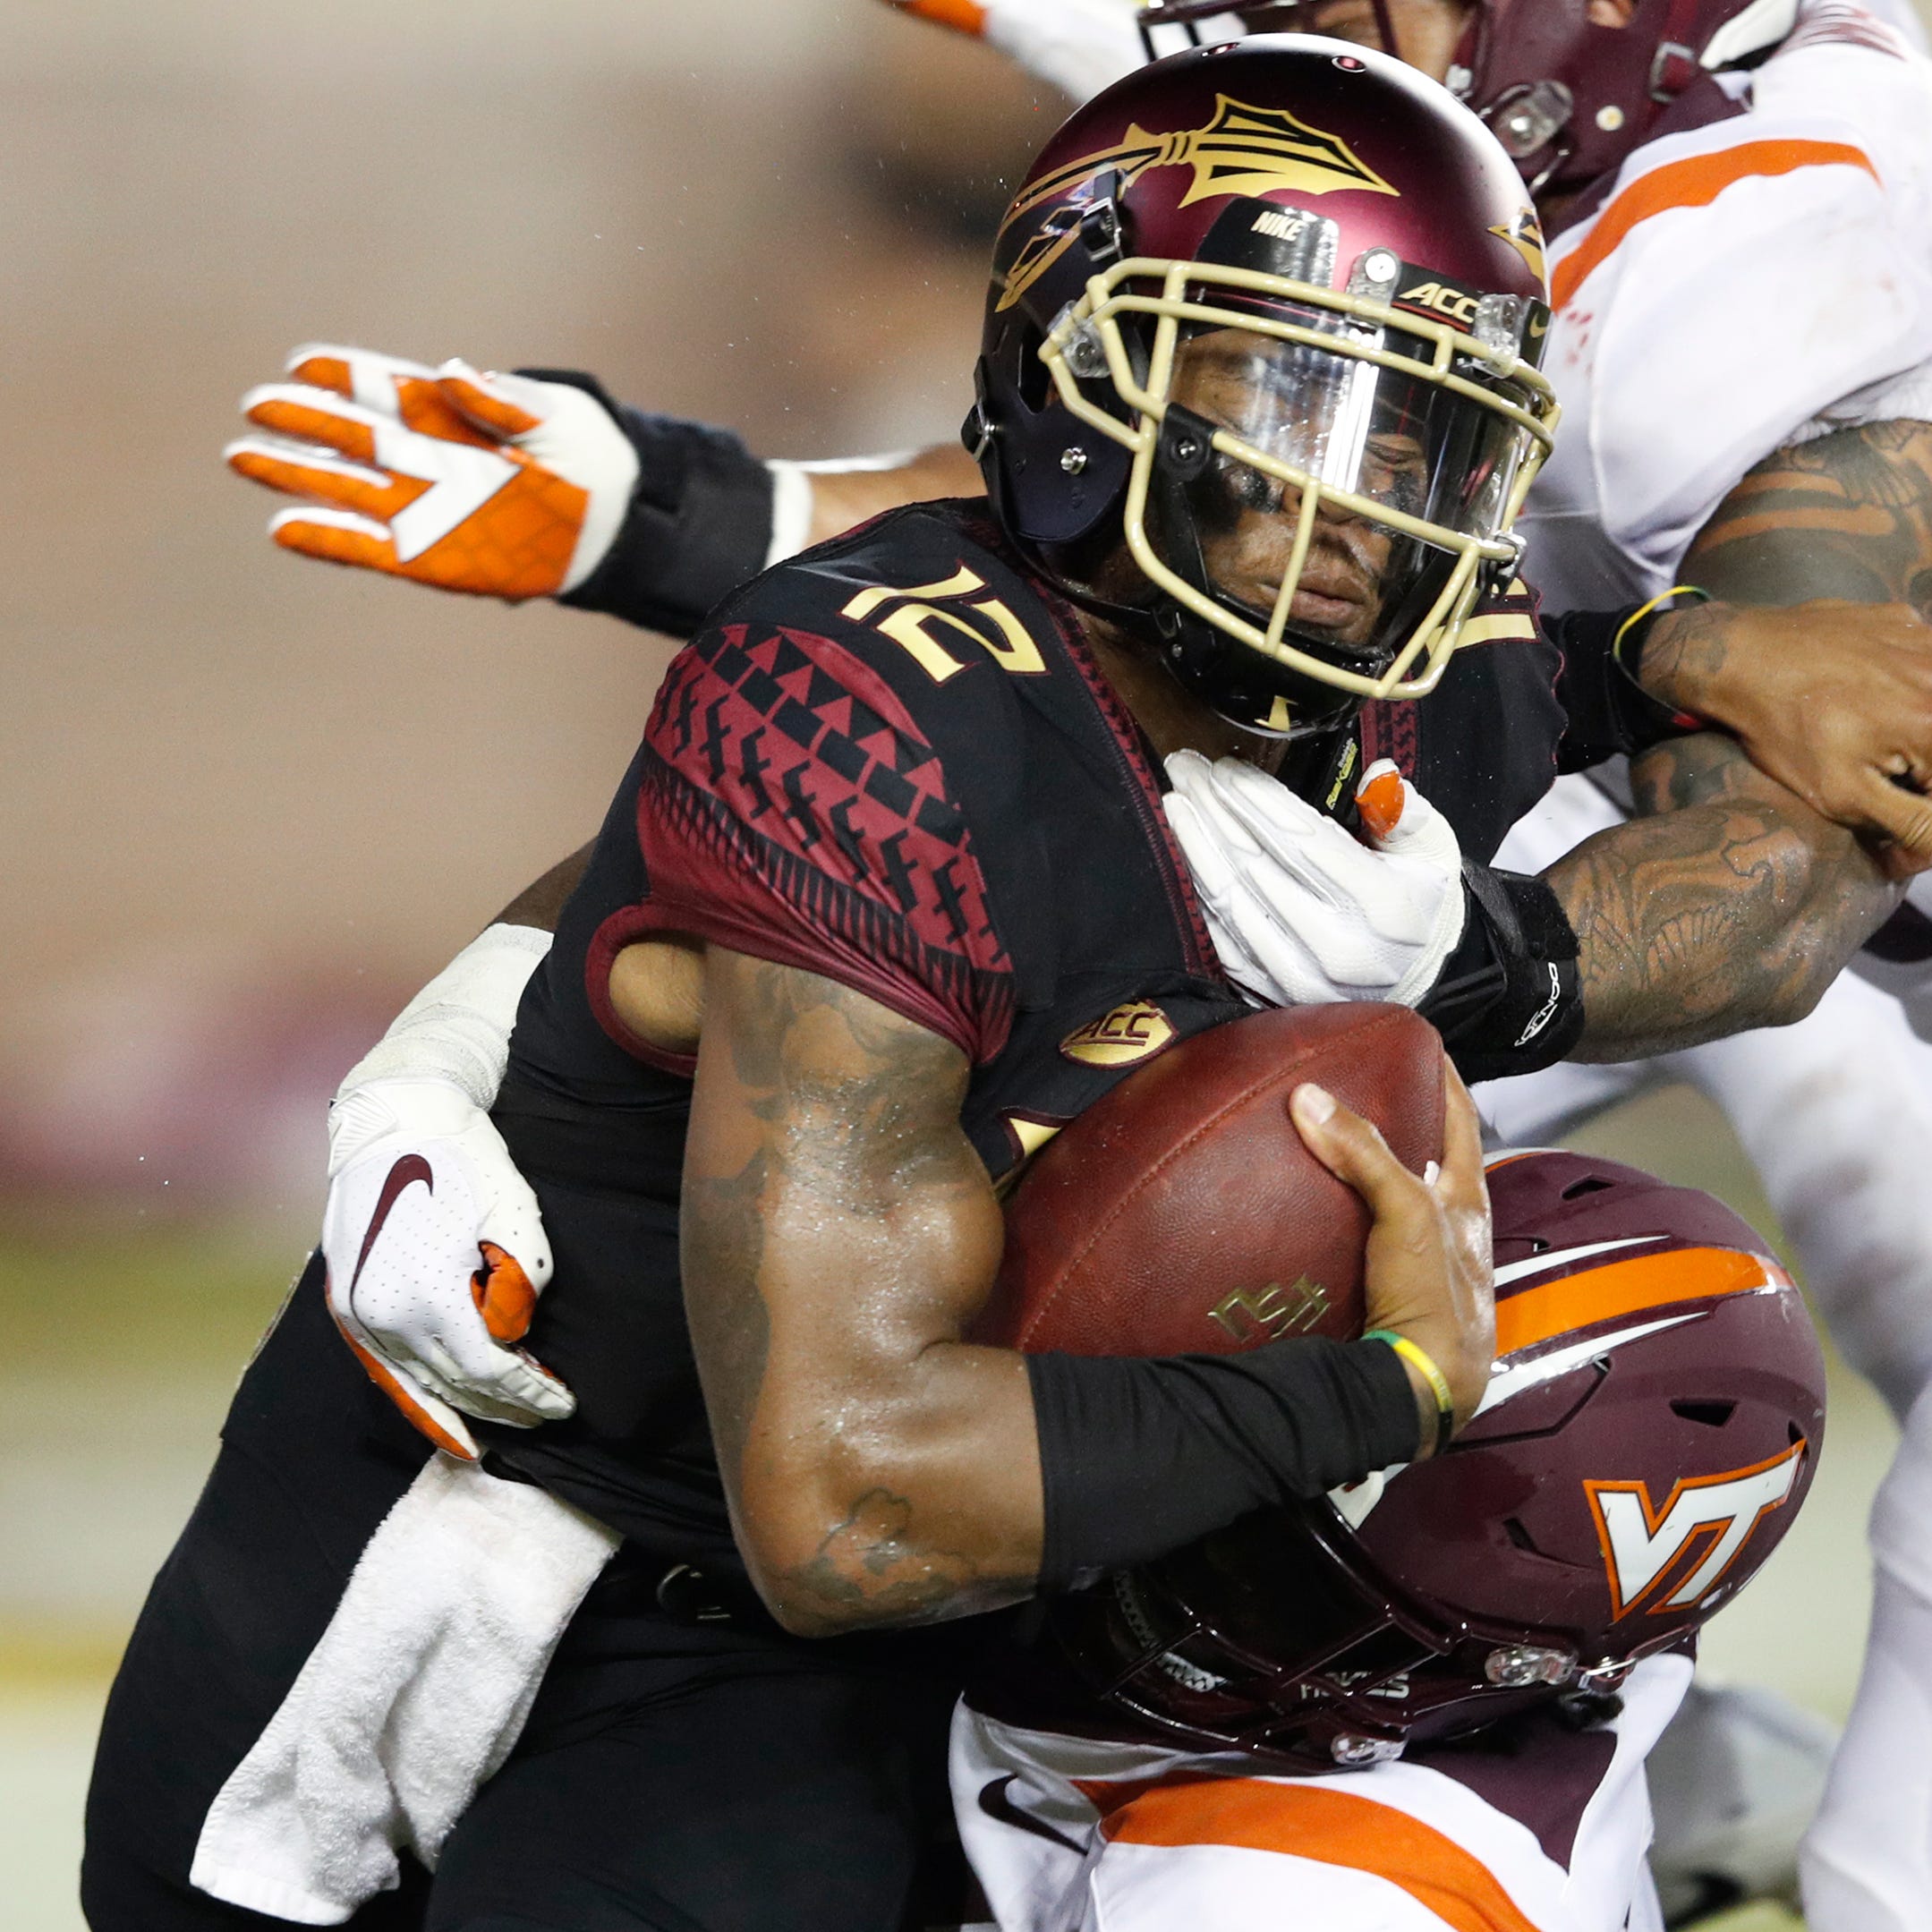 Florida State's Deondre Francois gets sacked by Virginia Tech's Trevon Hill in the second quarter of the game at Doak Campbell Stadium.